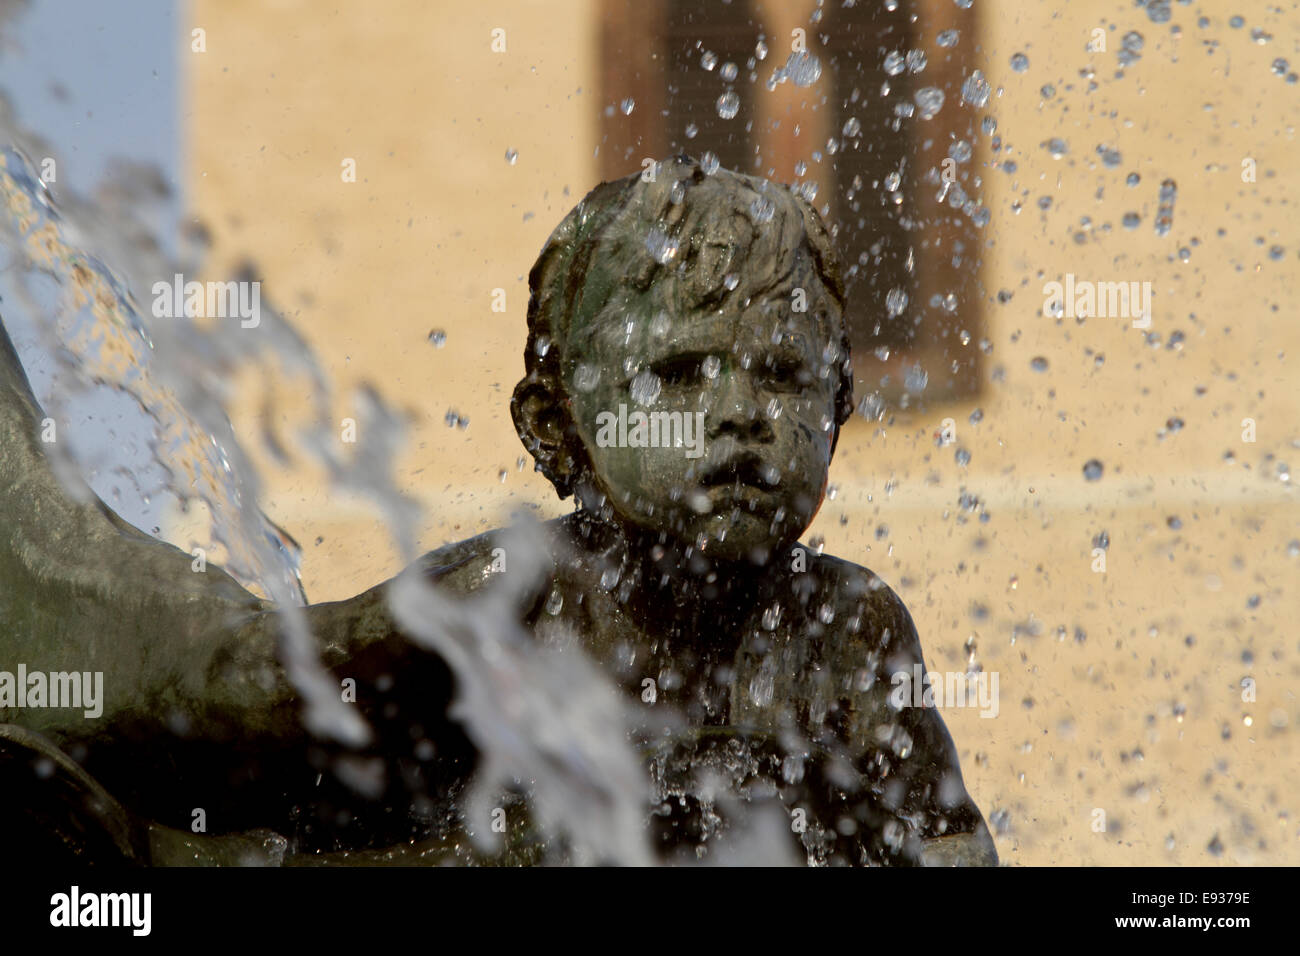 statue waterfall boy face water droplets fountain Stock Photo